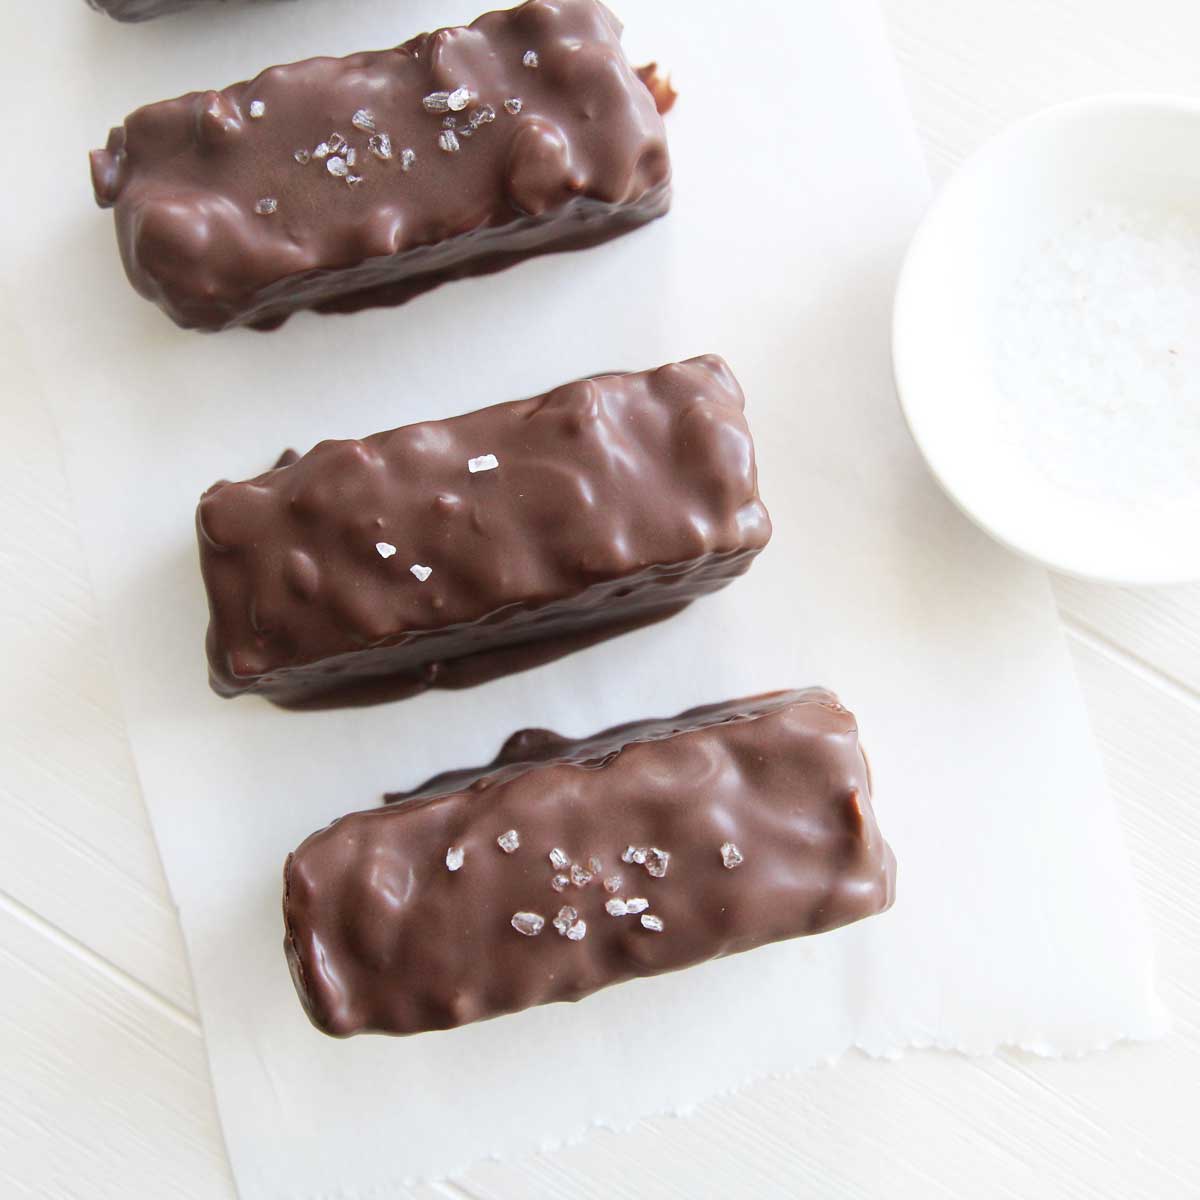 Guilt-Free Keto Snickers Protein Bars made with Collagen Peptides Powder - keto snickers